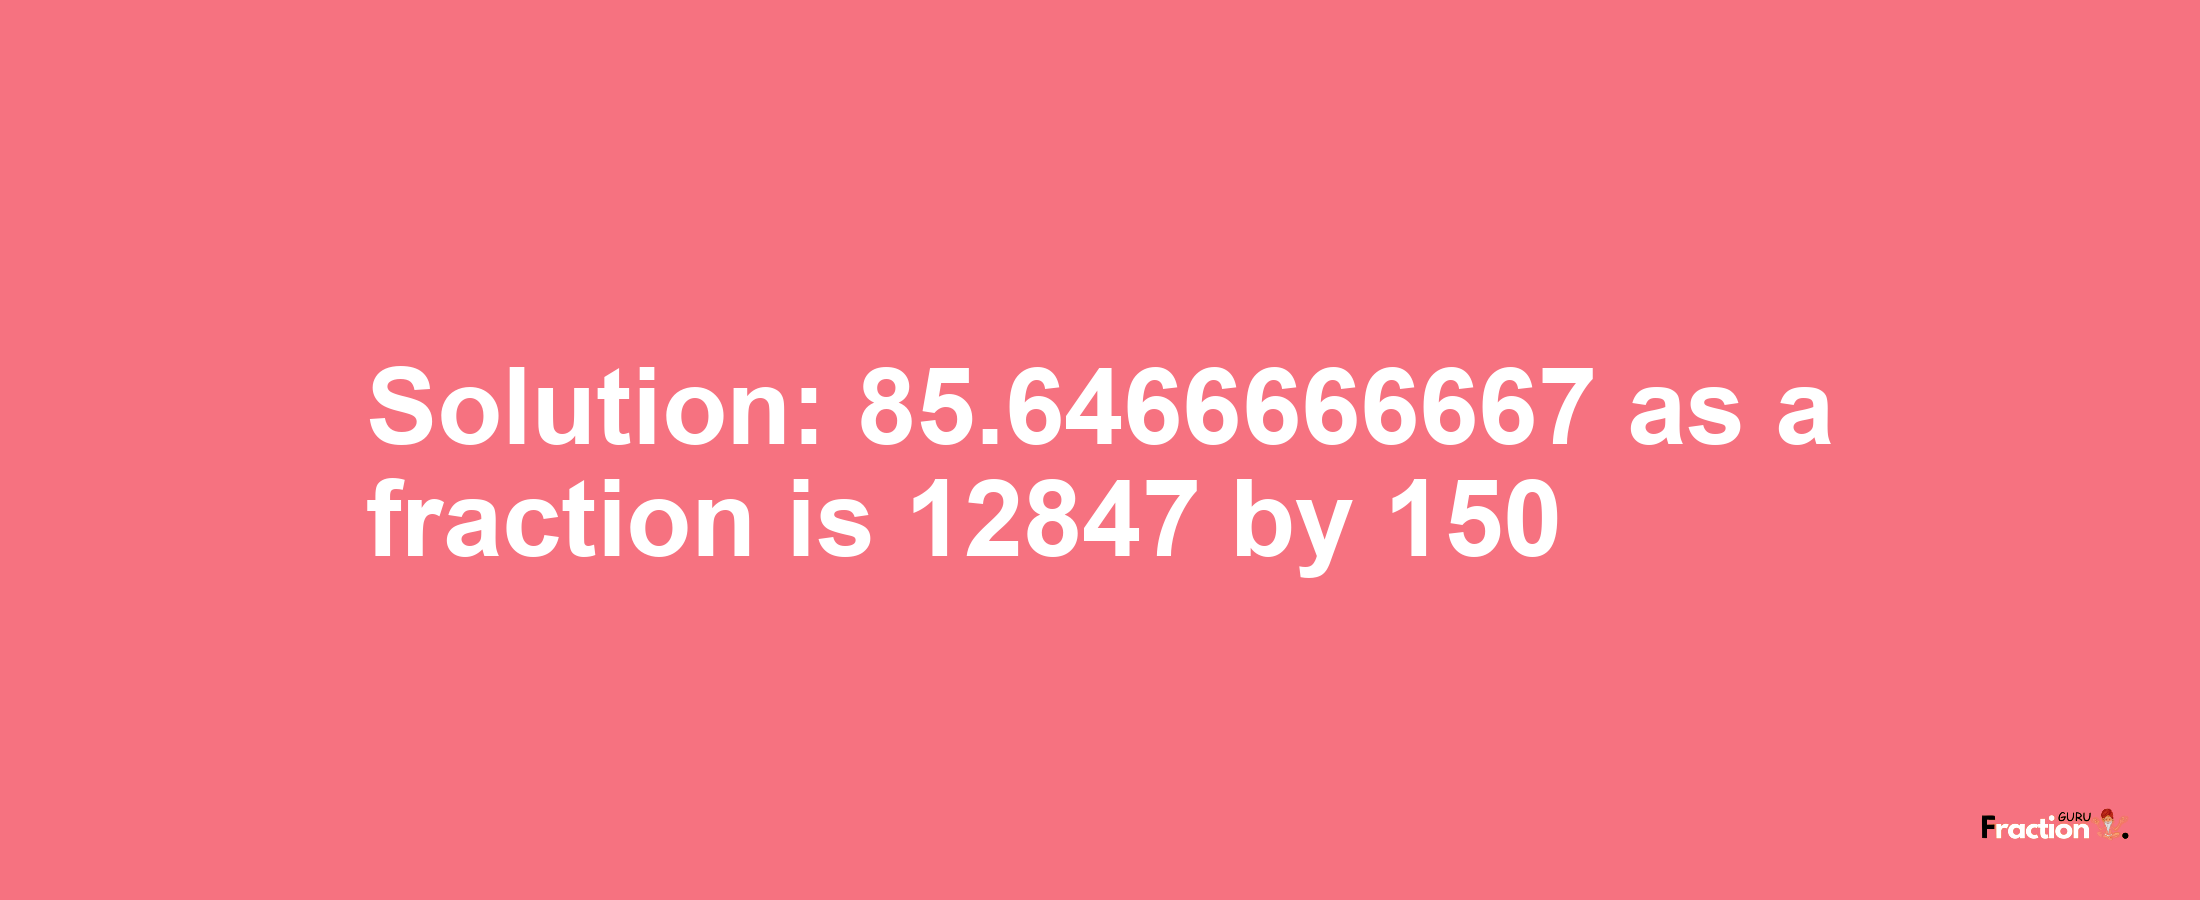 Solution:85.6466666667 as a fraction is 12847/150